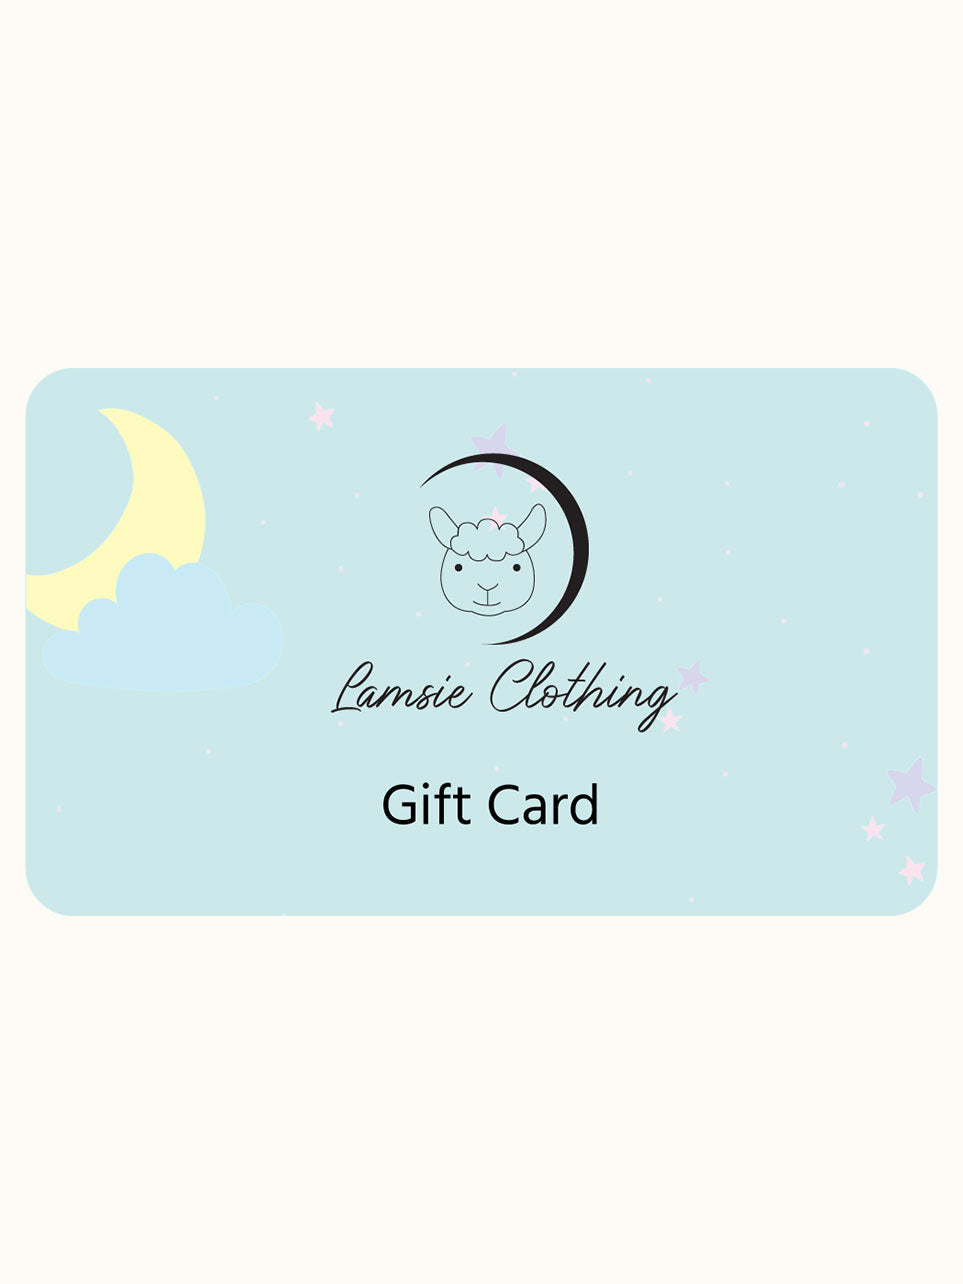 Lamsie Clothing Gift Card